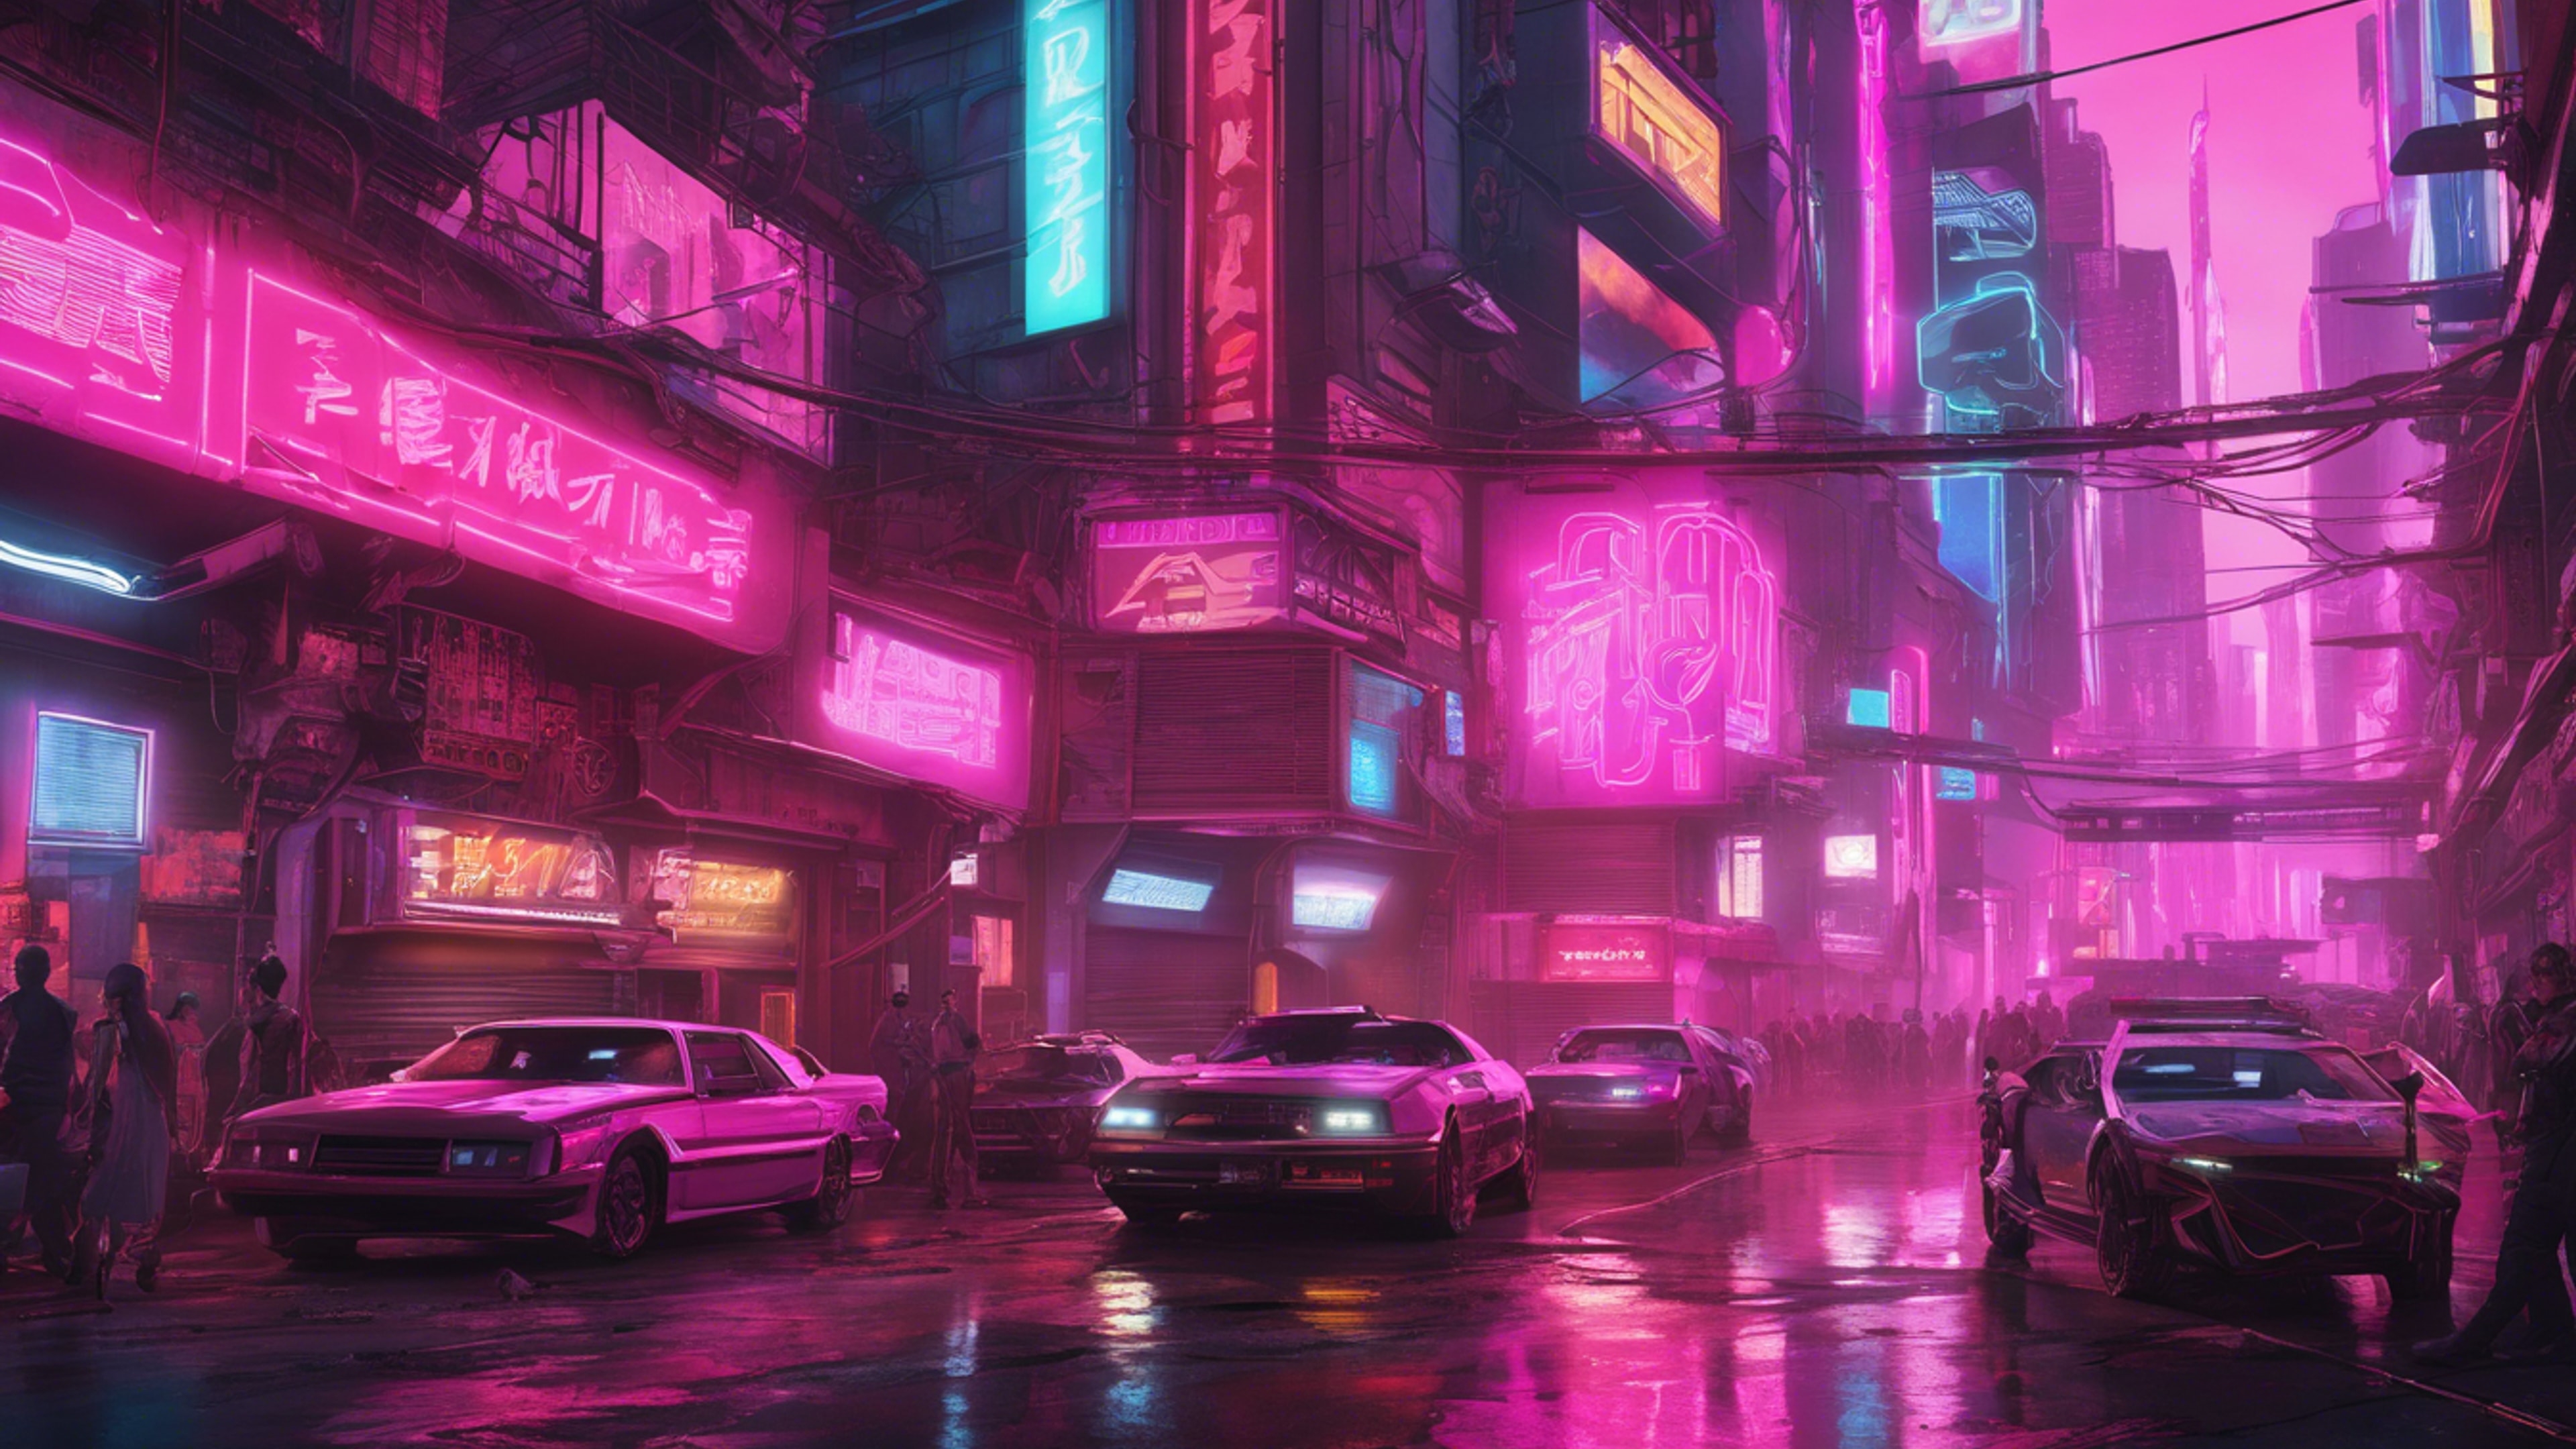 A wide-angle view of a bustling city street in the future, dominated by pink neon signs. Hintergrund[5759e15553a14a8aa13a]